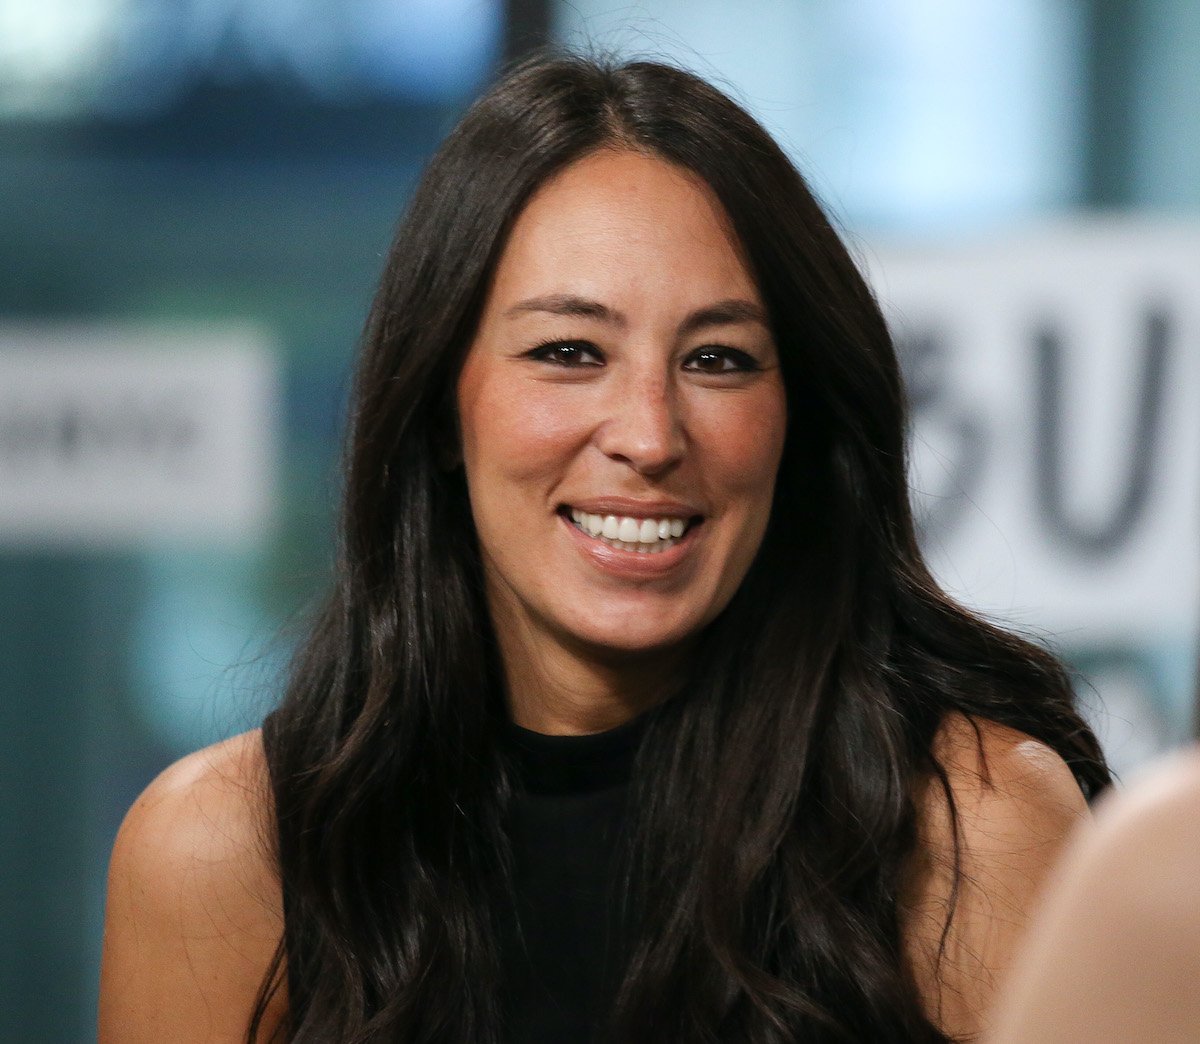 Joanna Gaines smiles and wears a black top at the BUILD event in New York City in 2017